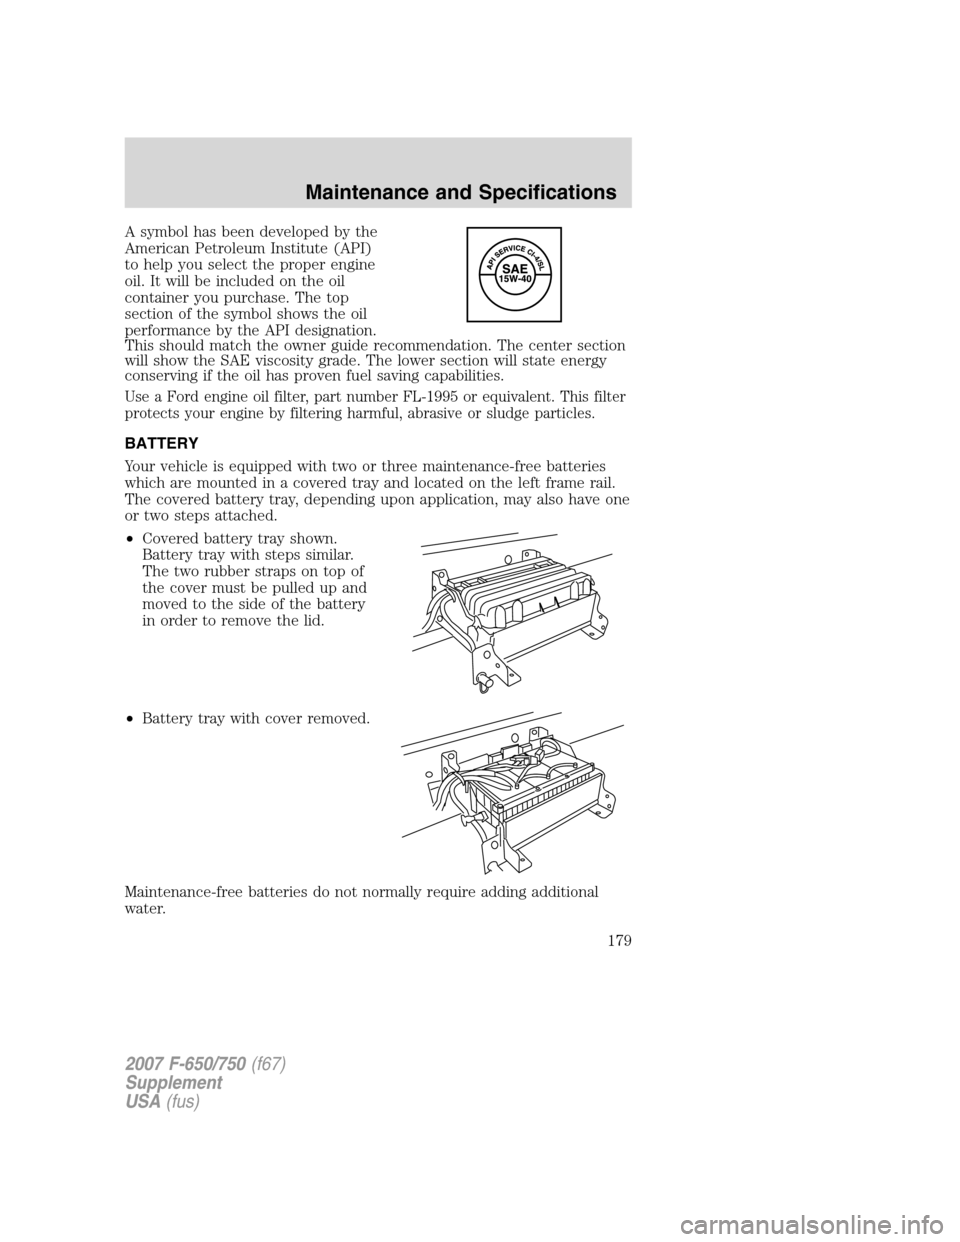 FORD F650 2007 11.G Owners Manual 
A symbol has been developed by the
American Petroleum Institute (API)
to help you select the proper engine
oil. It will be included on the oil
container you purchase. The top
section of the symbol sh